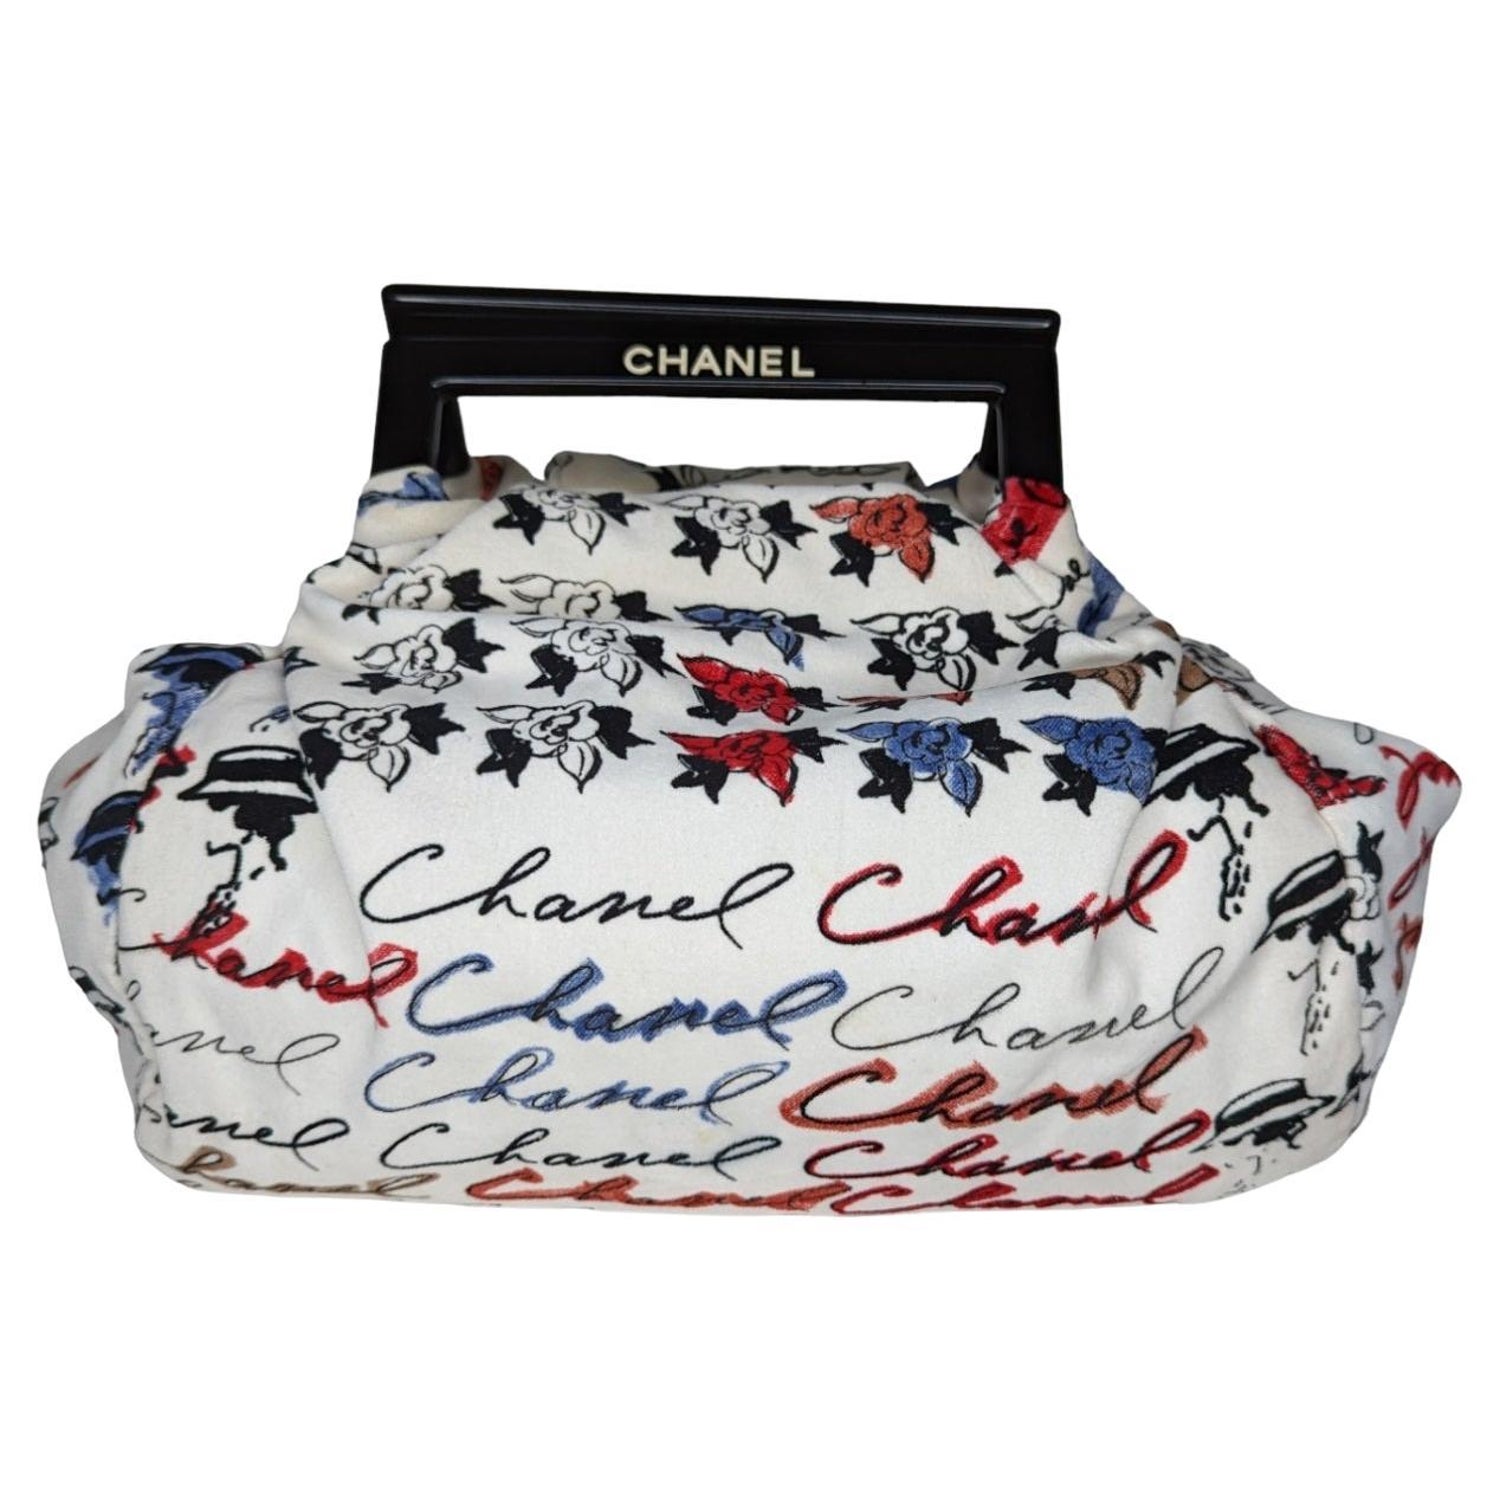 Chanel Camellia Top - 12 For Sale on 1stDibs